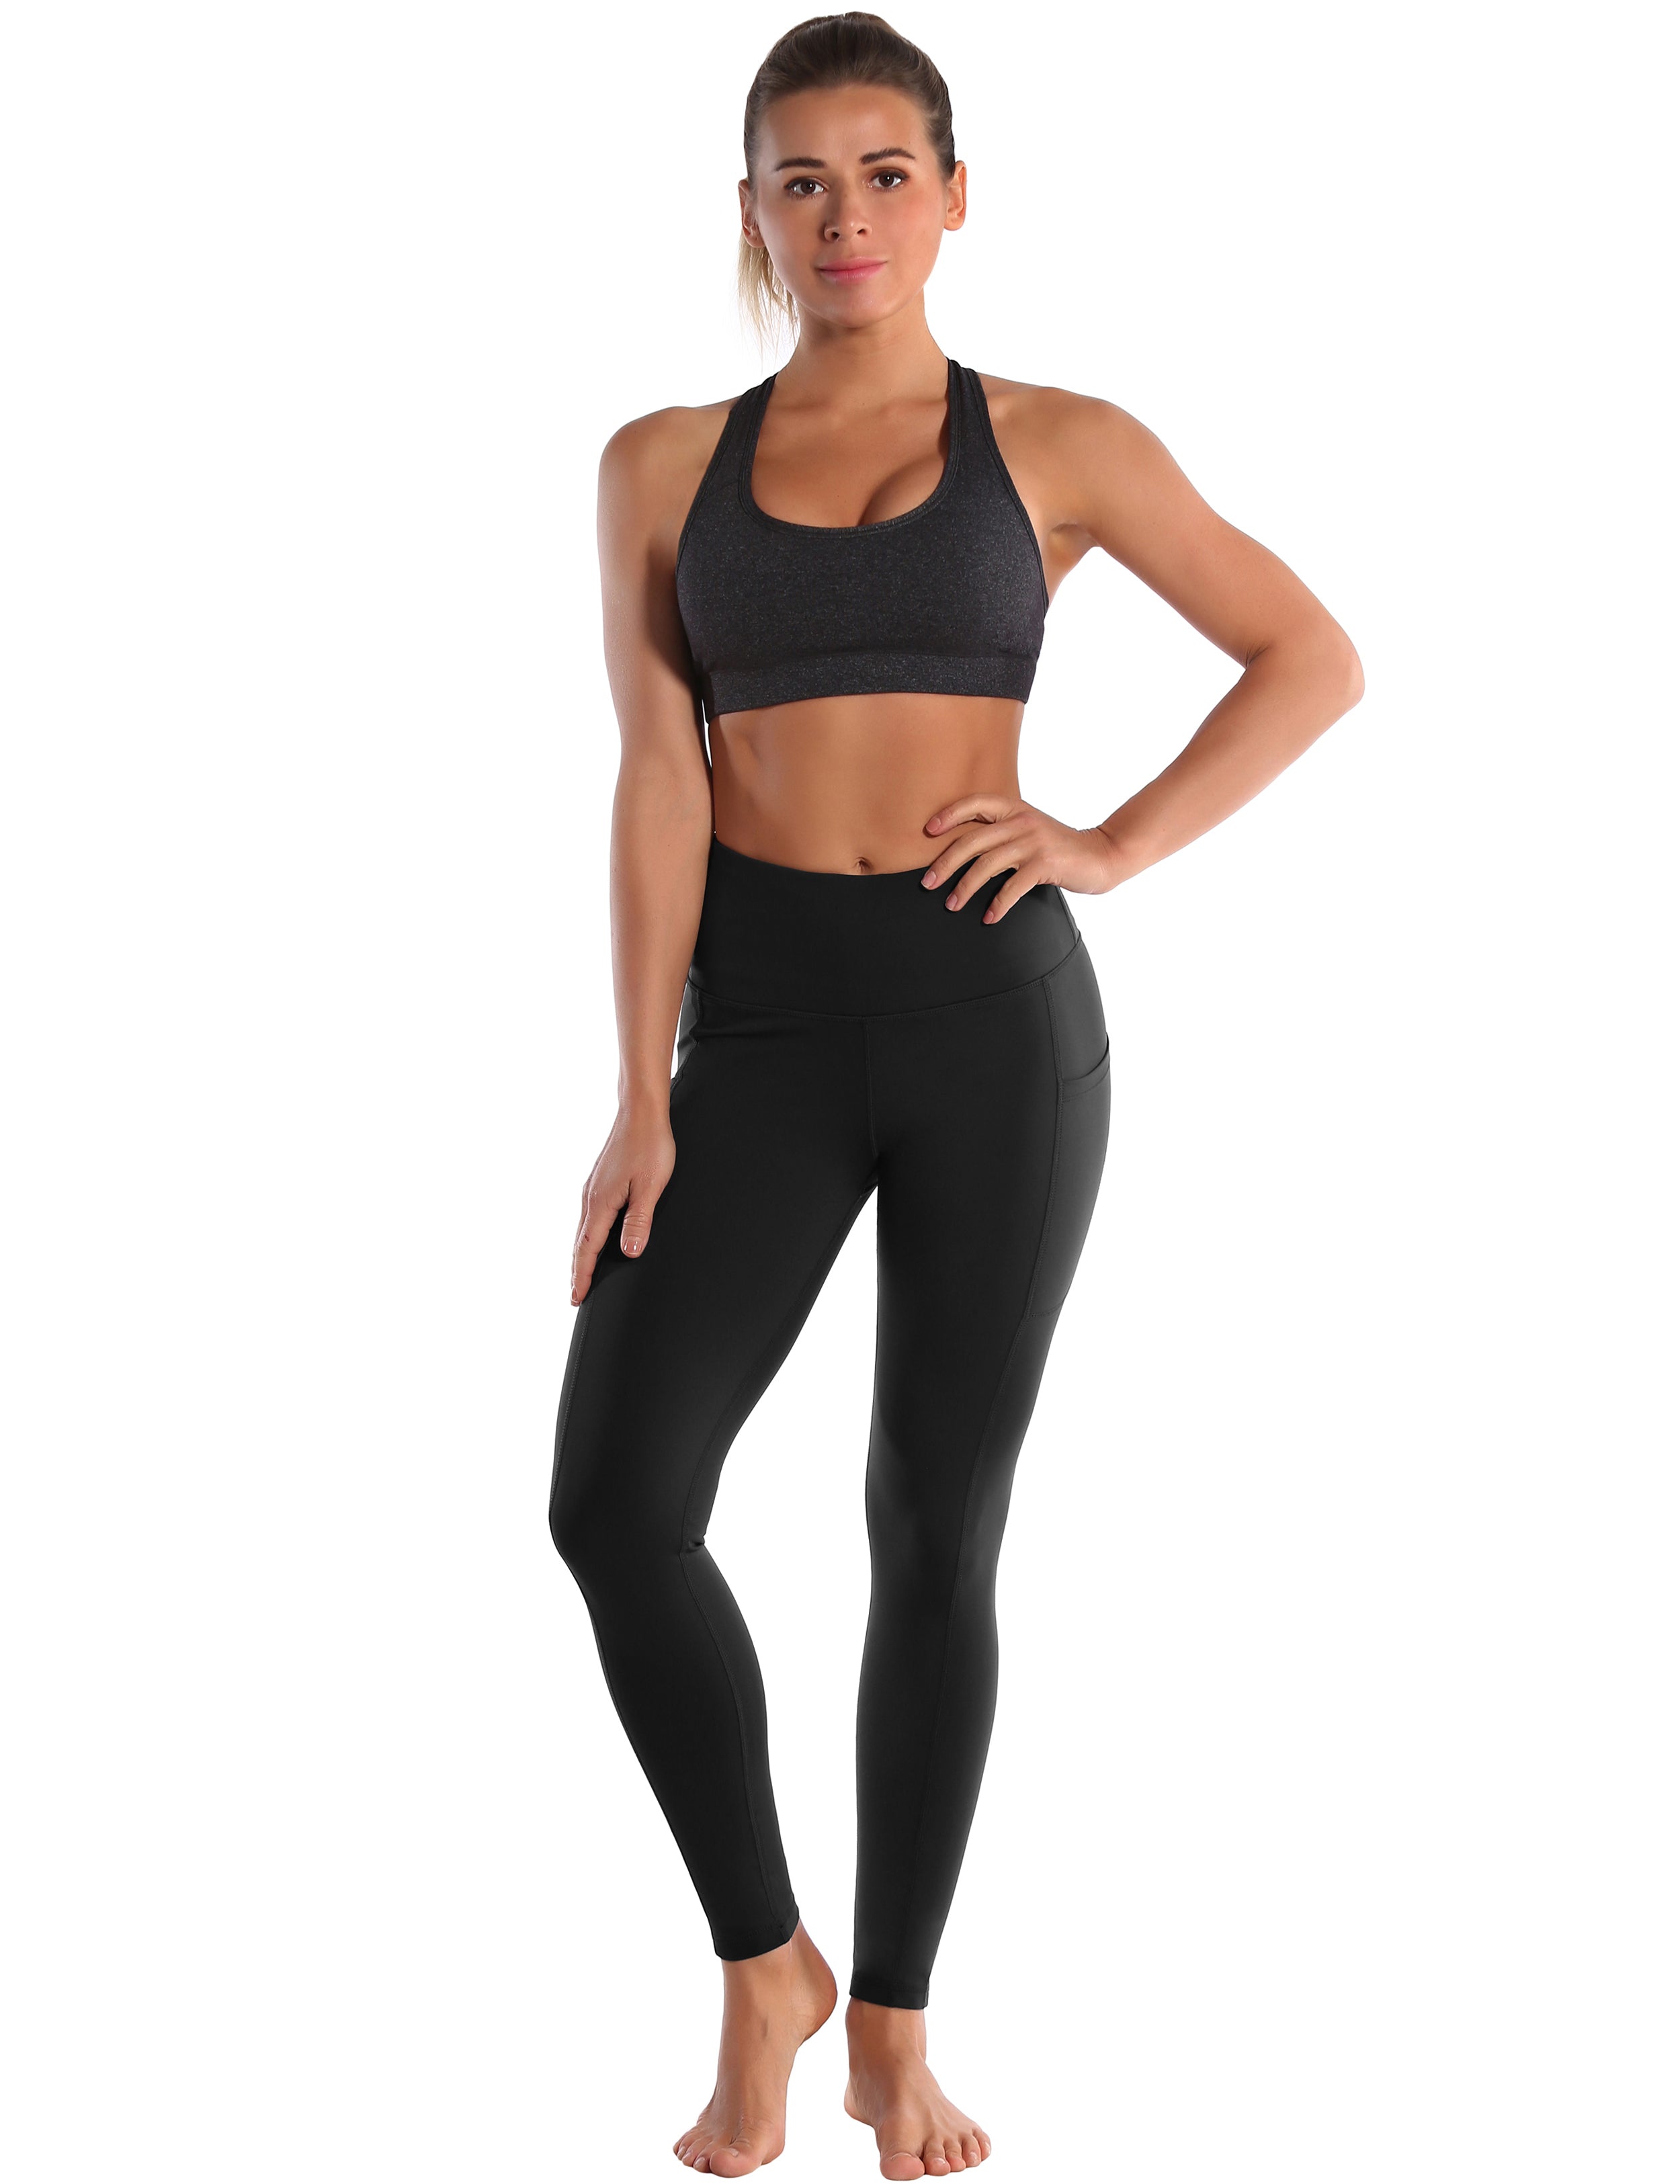 Hip Line Side Pockets Pilates Pants black Sexy Hip Line Side Pockets 75%Nylon/25%Spandex Fabric doesn't attract lint easily 4-way stretch No see-through Moisture-wicking Tummy control Inner pocket Two lengths